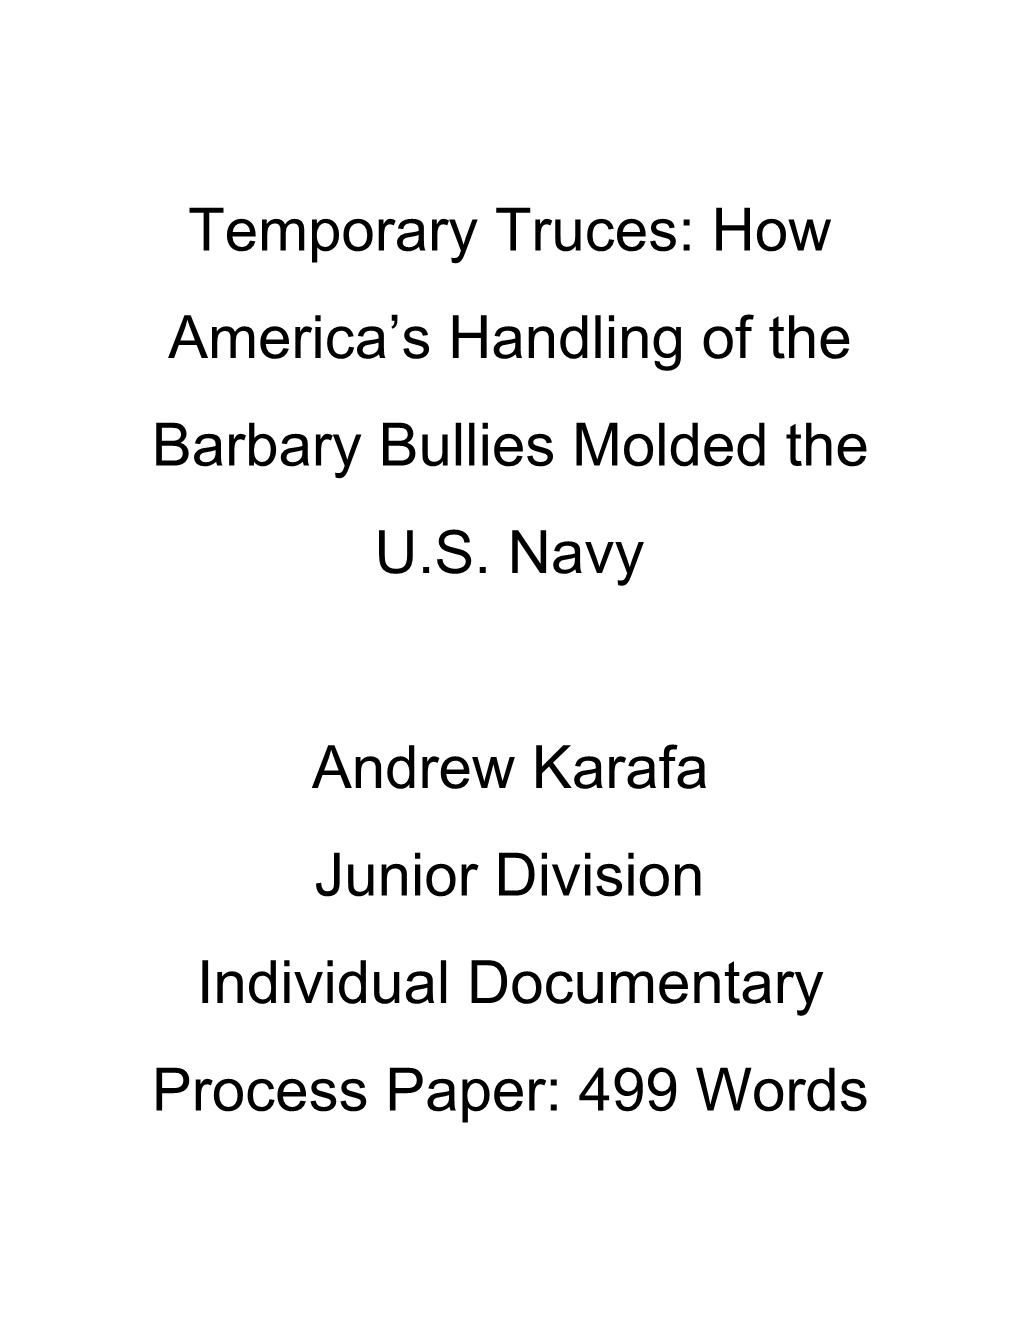 Temporary Truces: How America's Handling of the Barbary Bullies